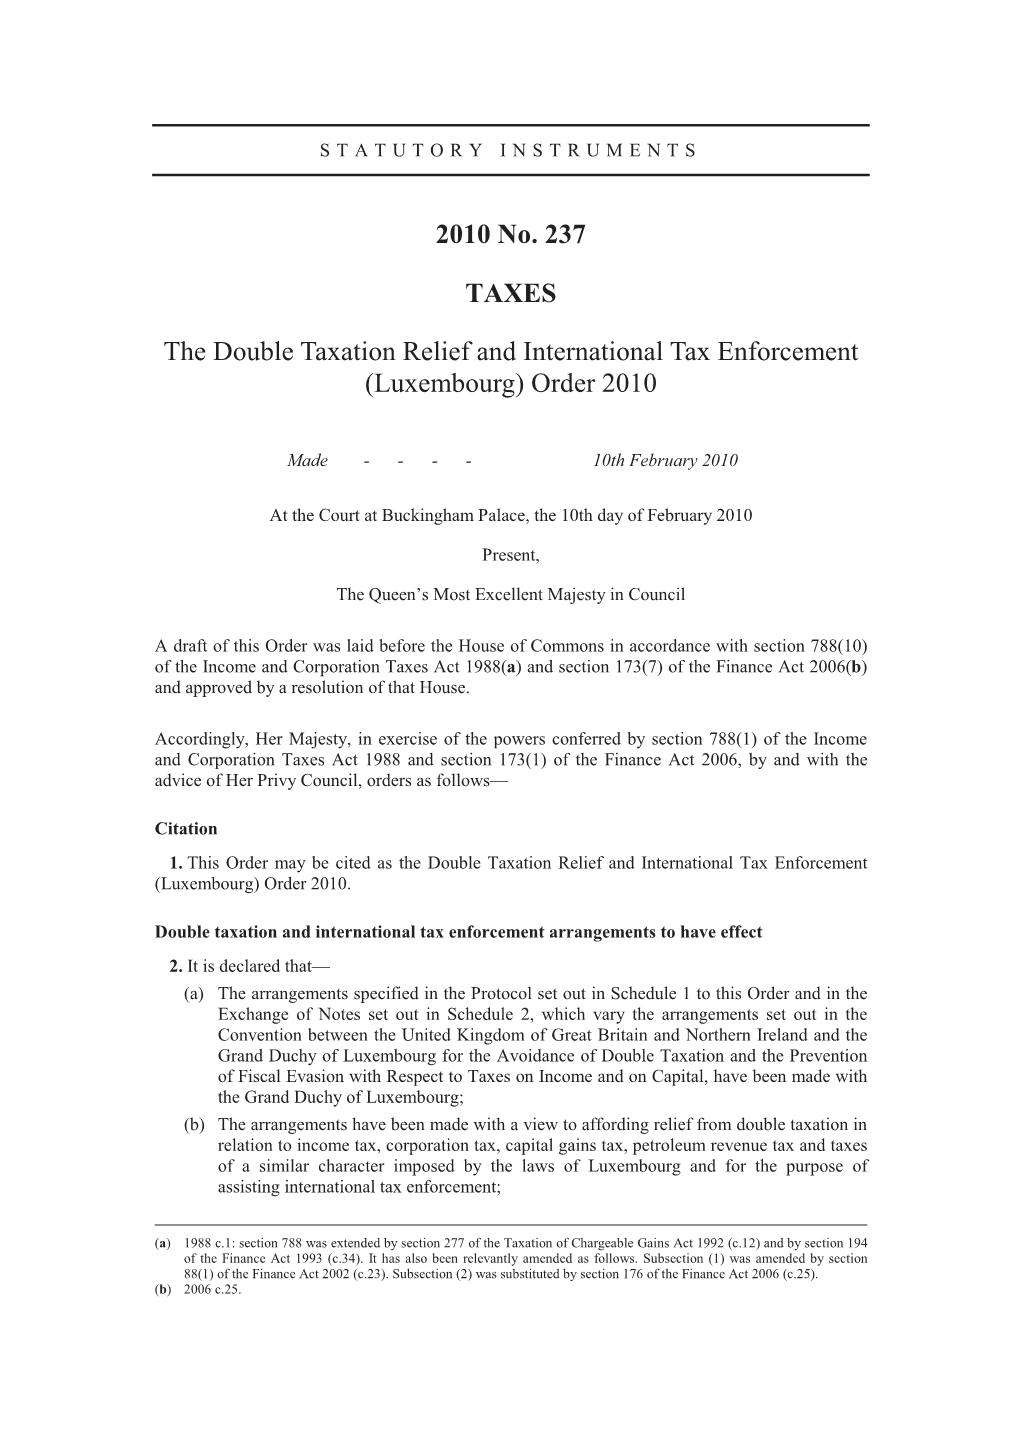 2010 No. 237 TAXES the Double Taxation Relief and International